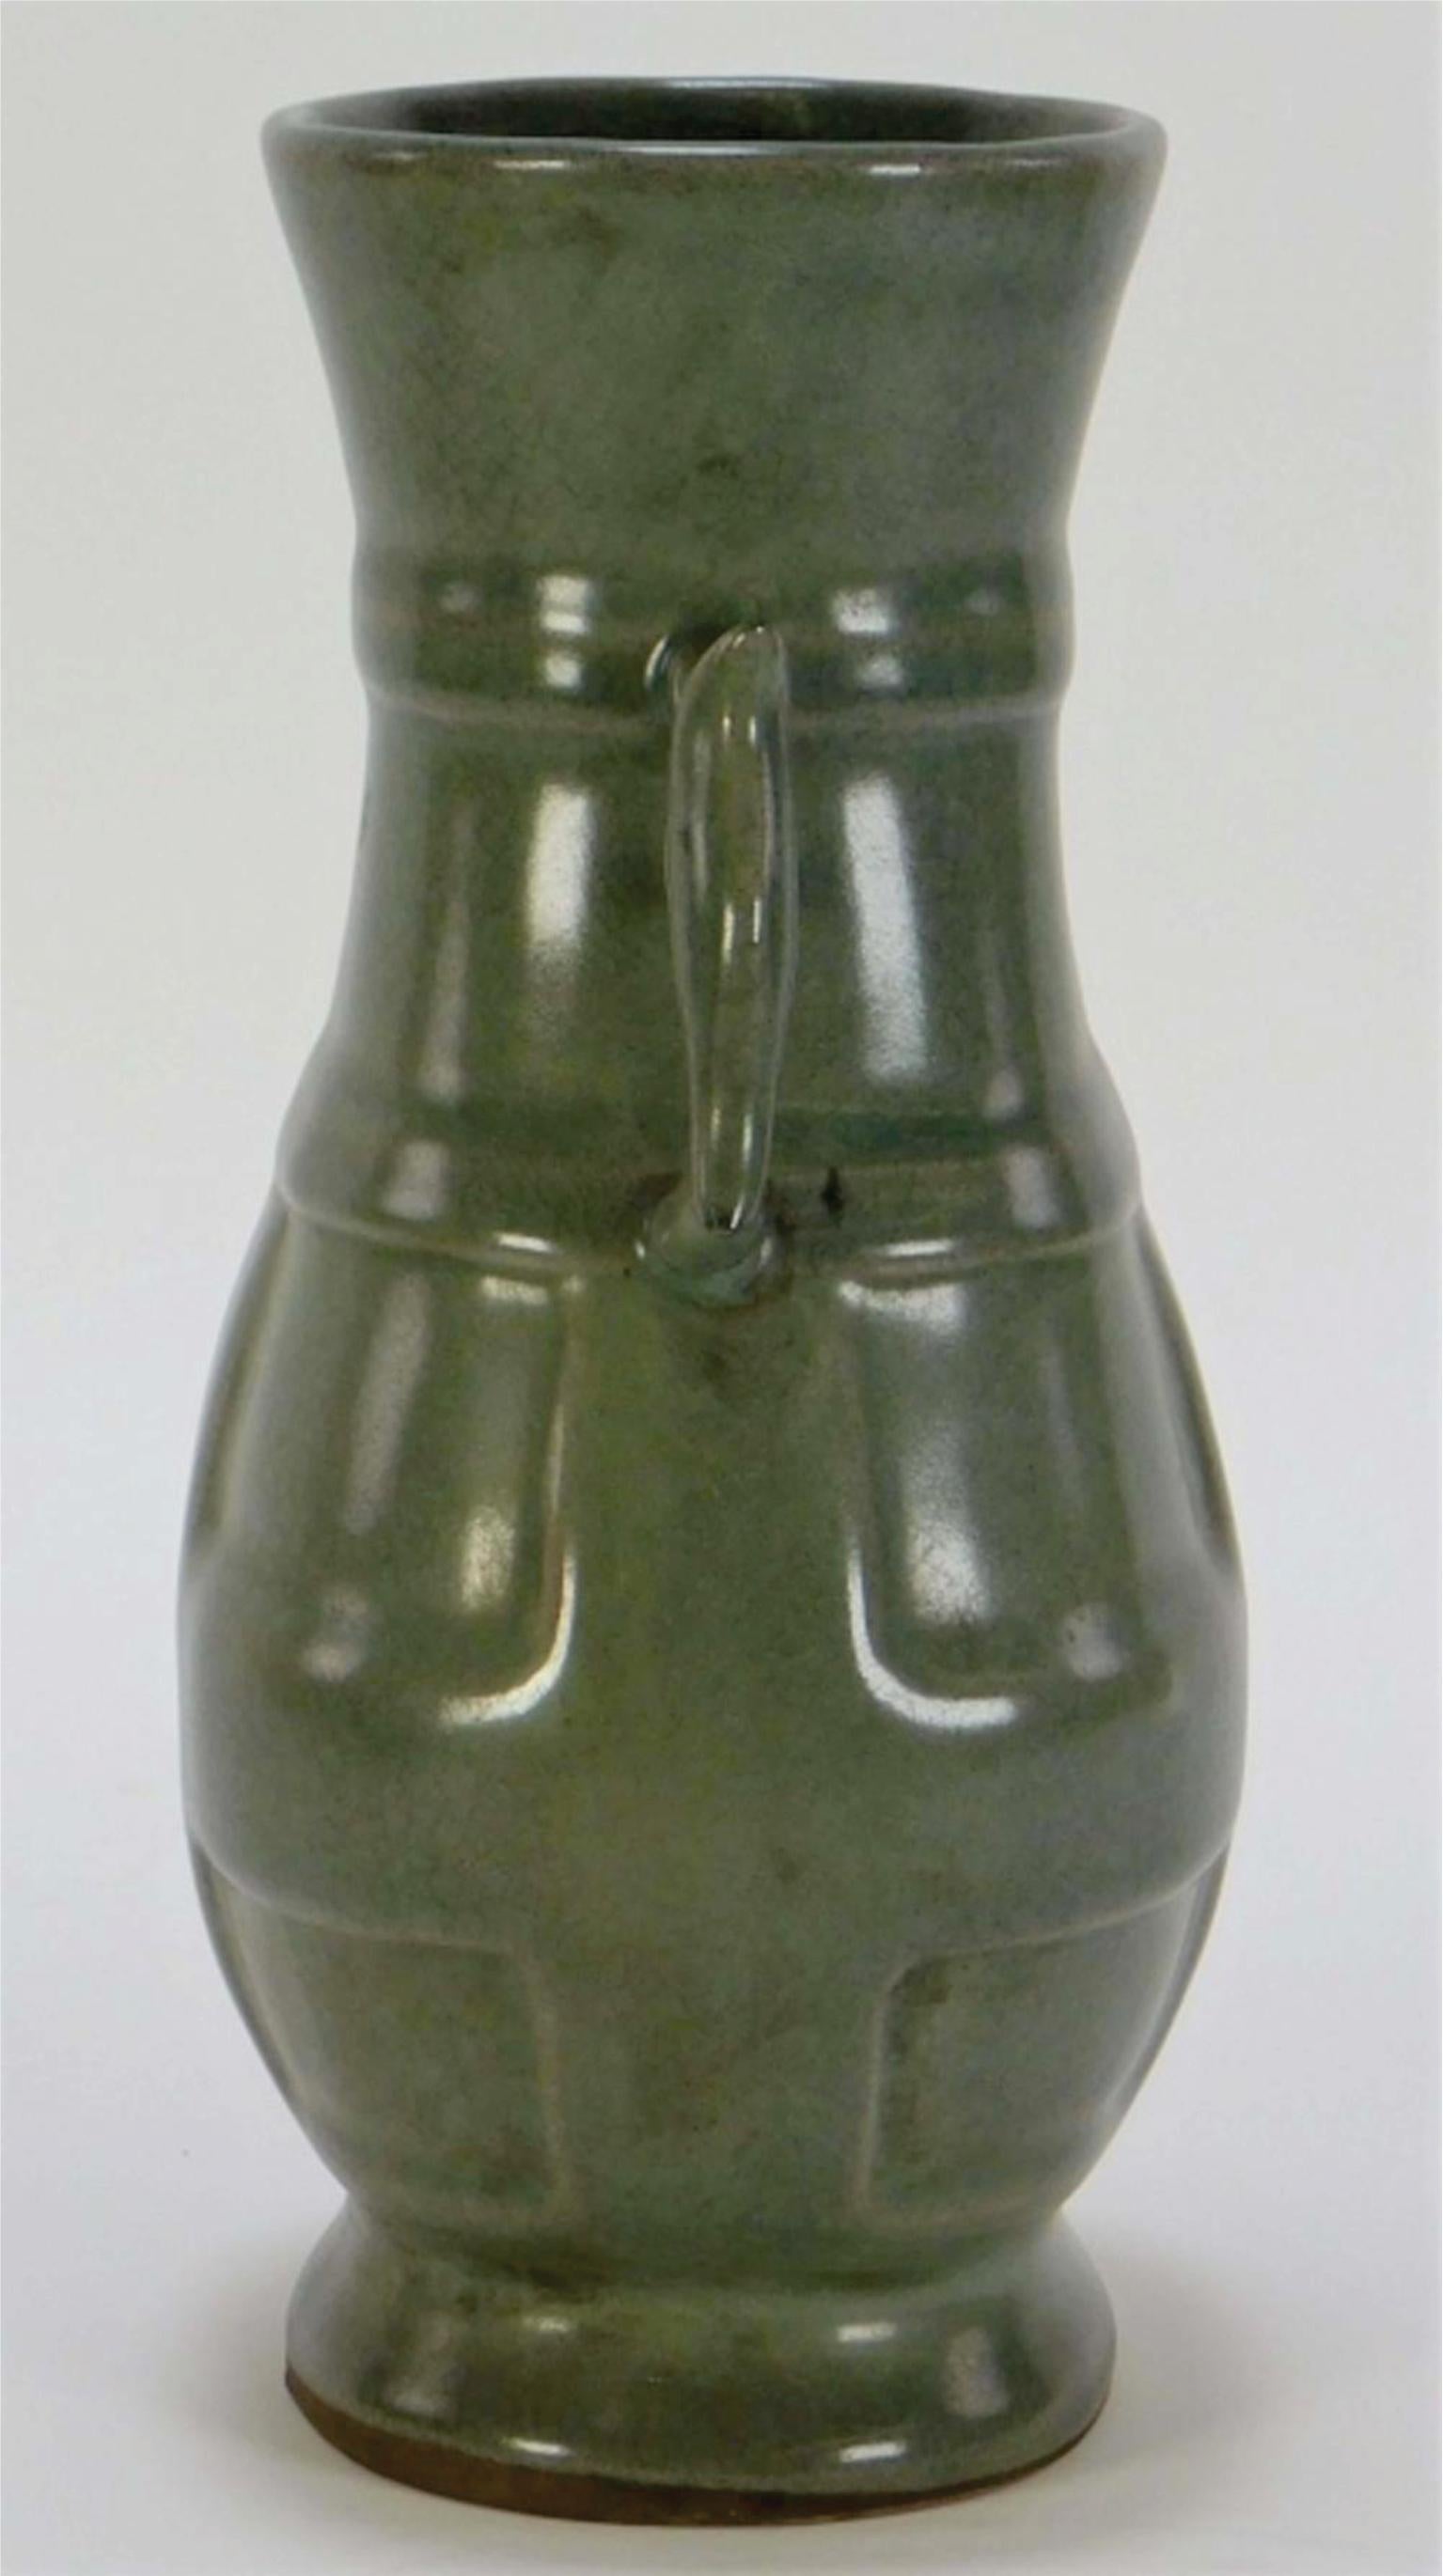 China,19th Century
It flared rim vase with applied geometric banding to the body and applied handles finished in a sage green celadon.
It was glazed on both the inside and outside with the natural crackle patterns.

Dimensions
8.75